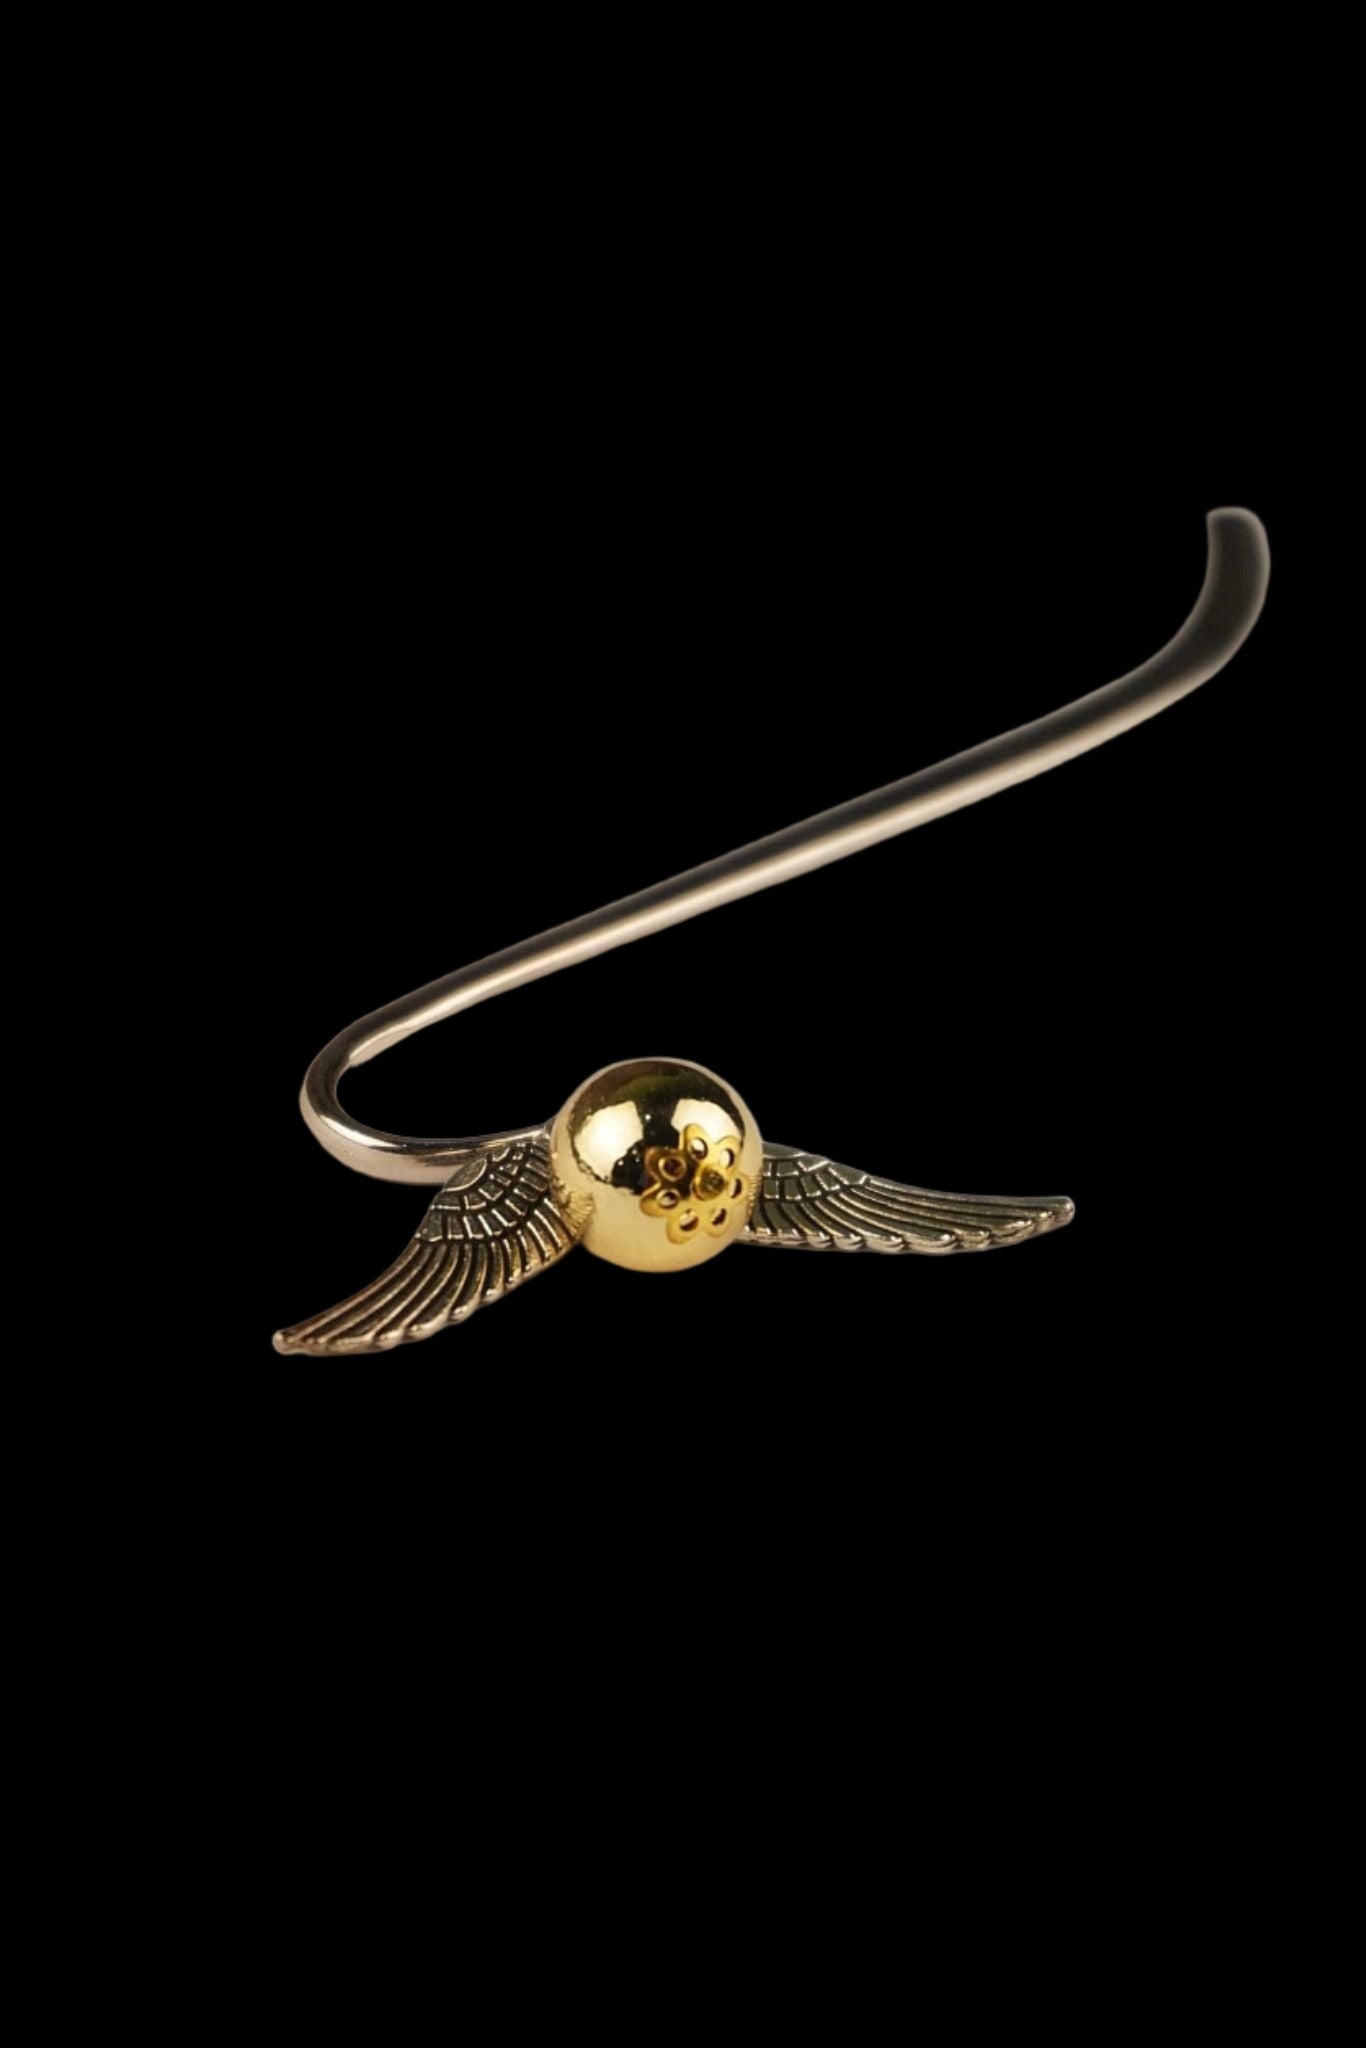 Golden Snitch Harry Potter Bookmark